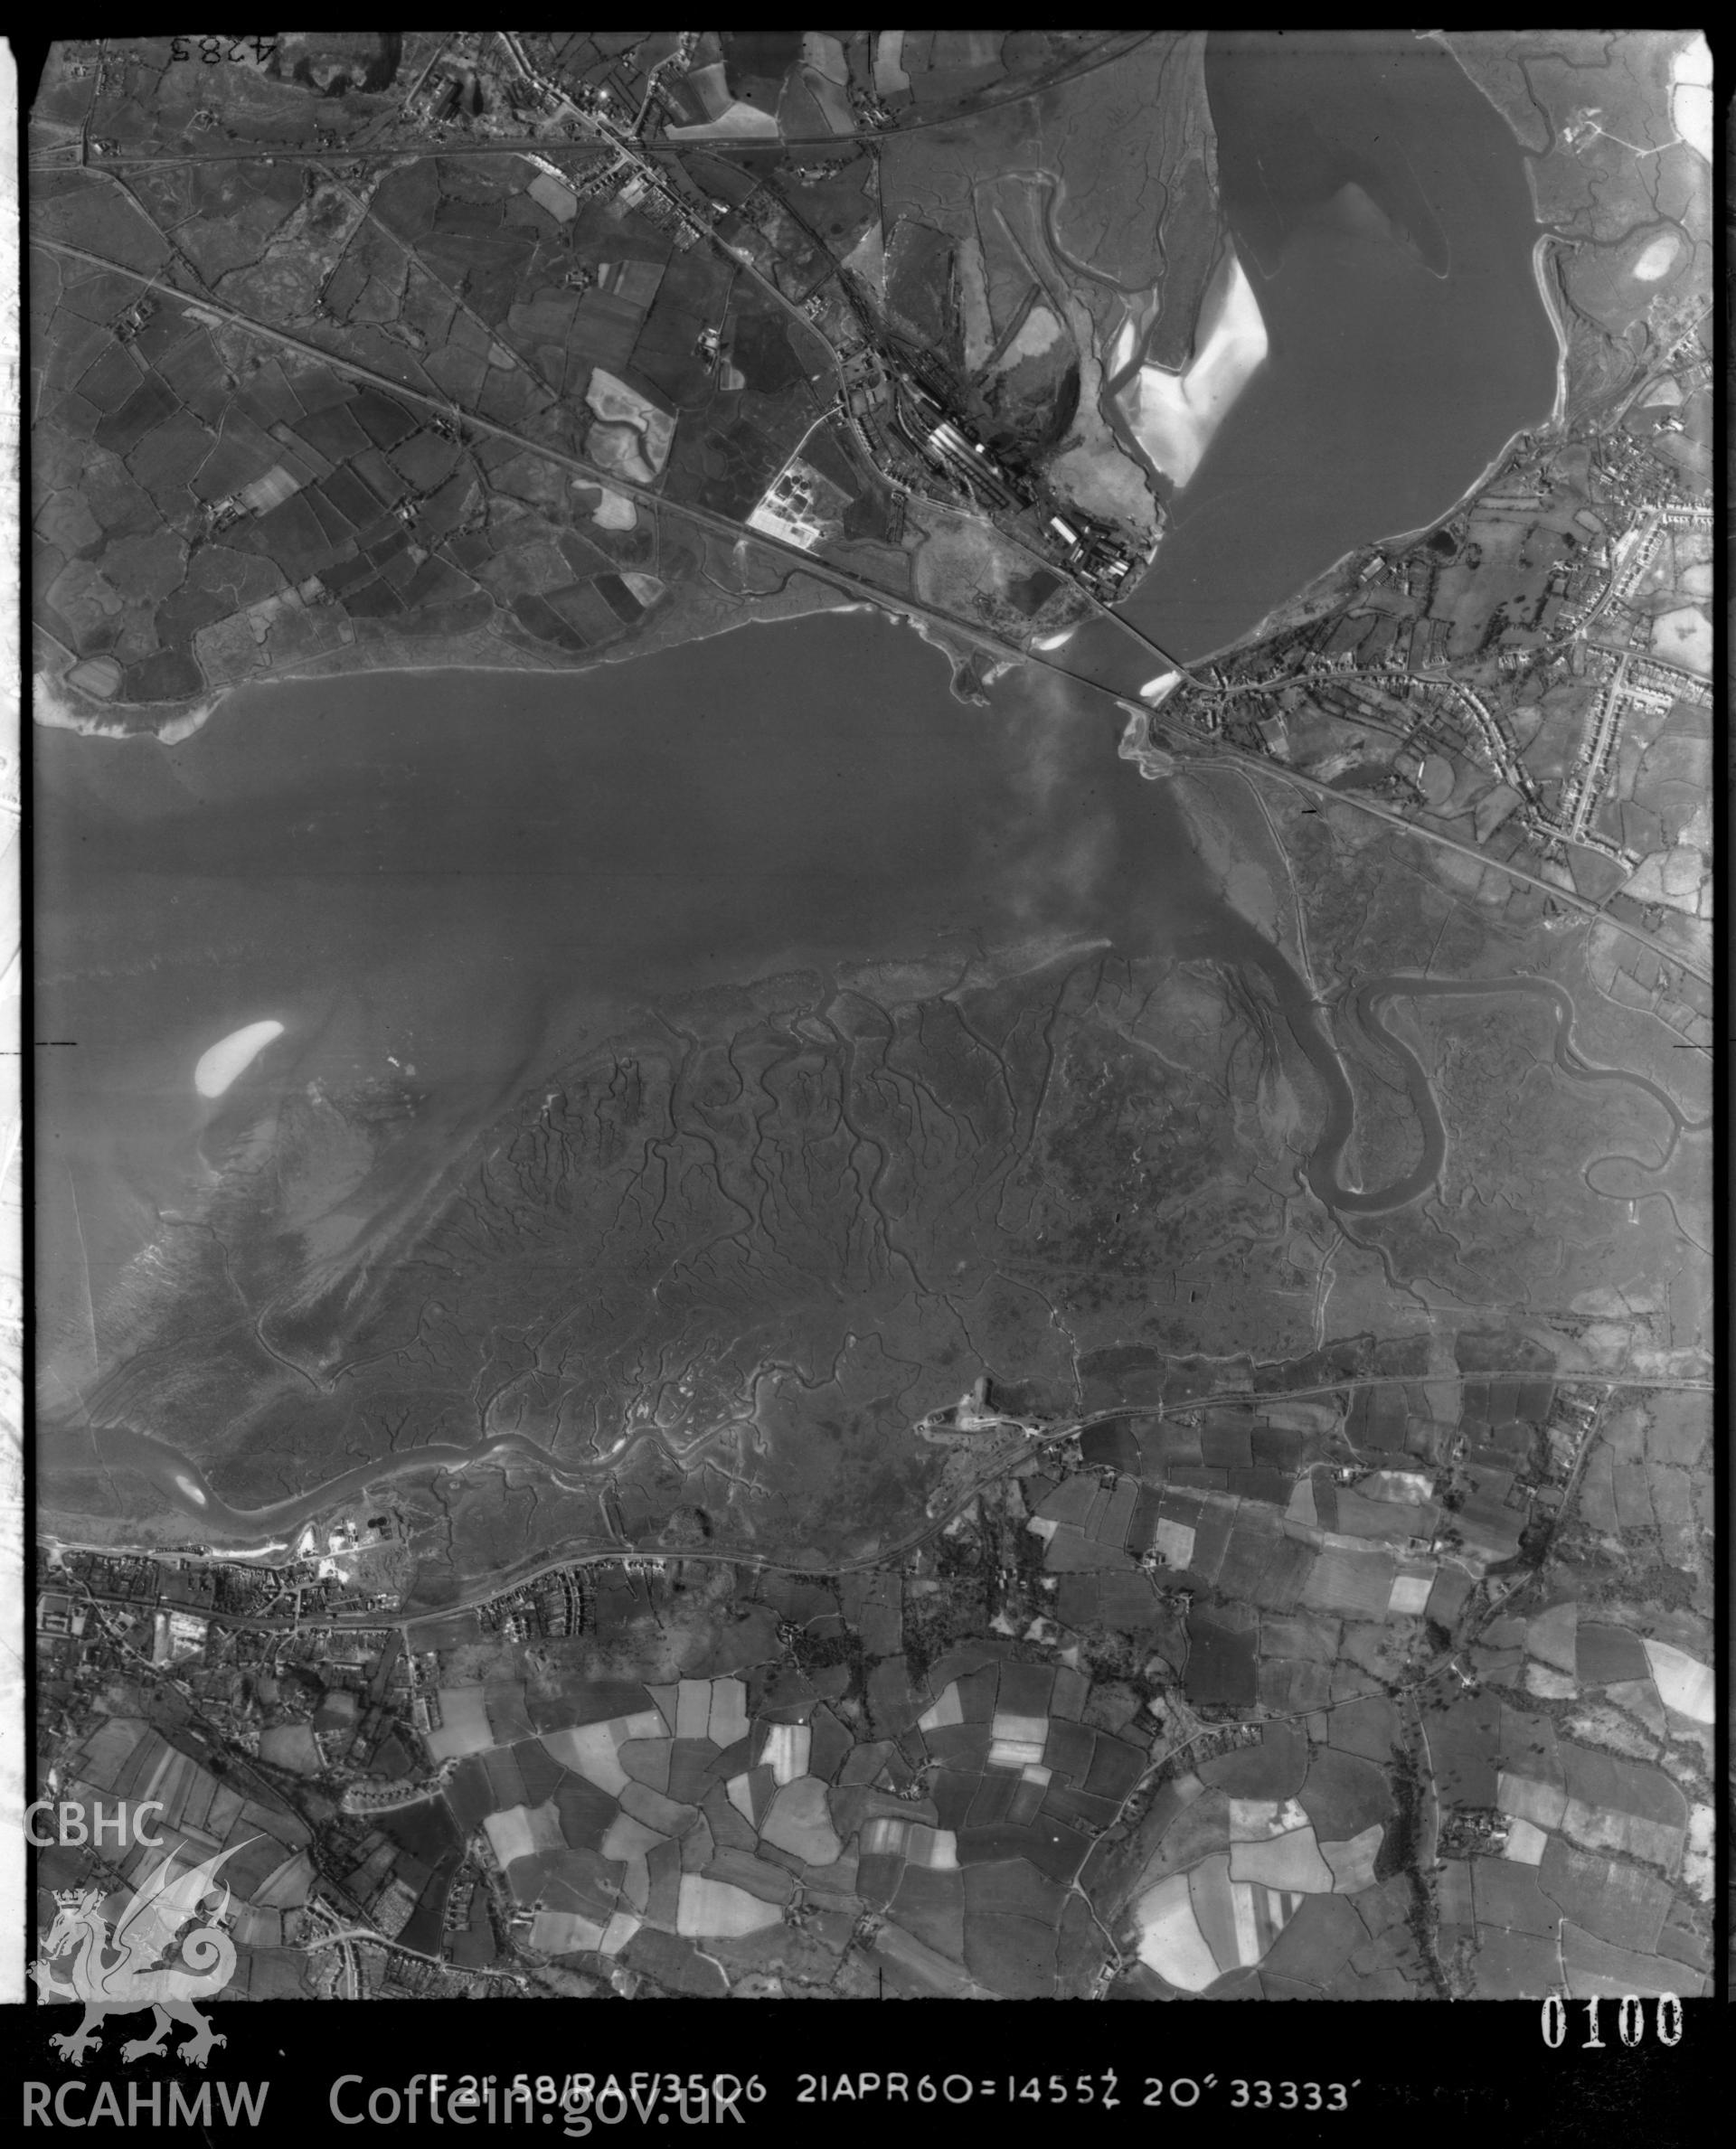 Black and white vertical aerial photograph showing Loughor Railway Bridge taken by the RAF, at a scale of 1:10000.